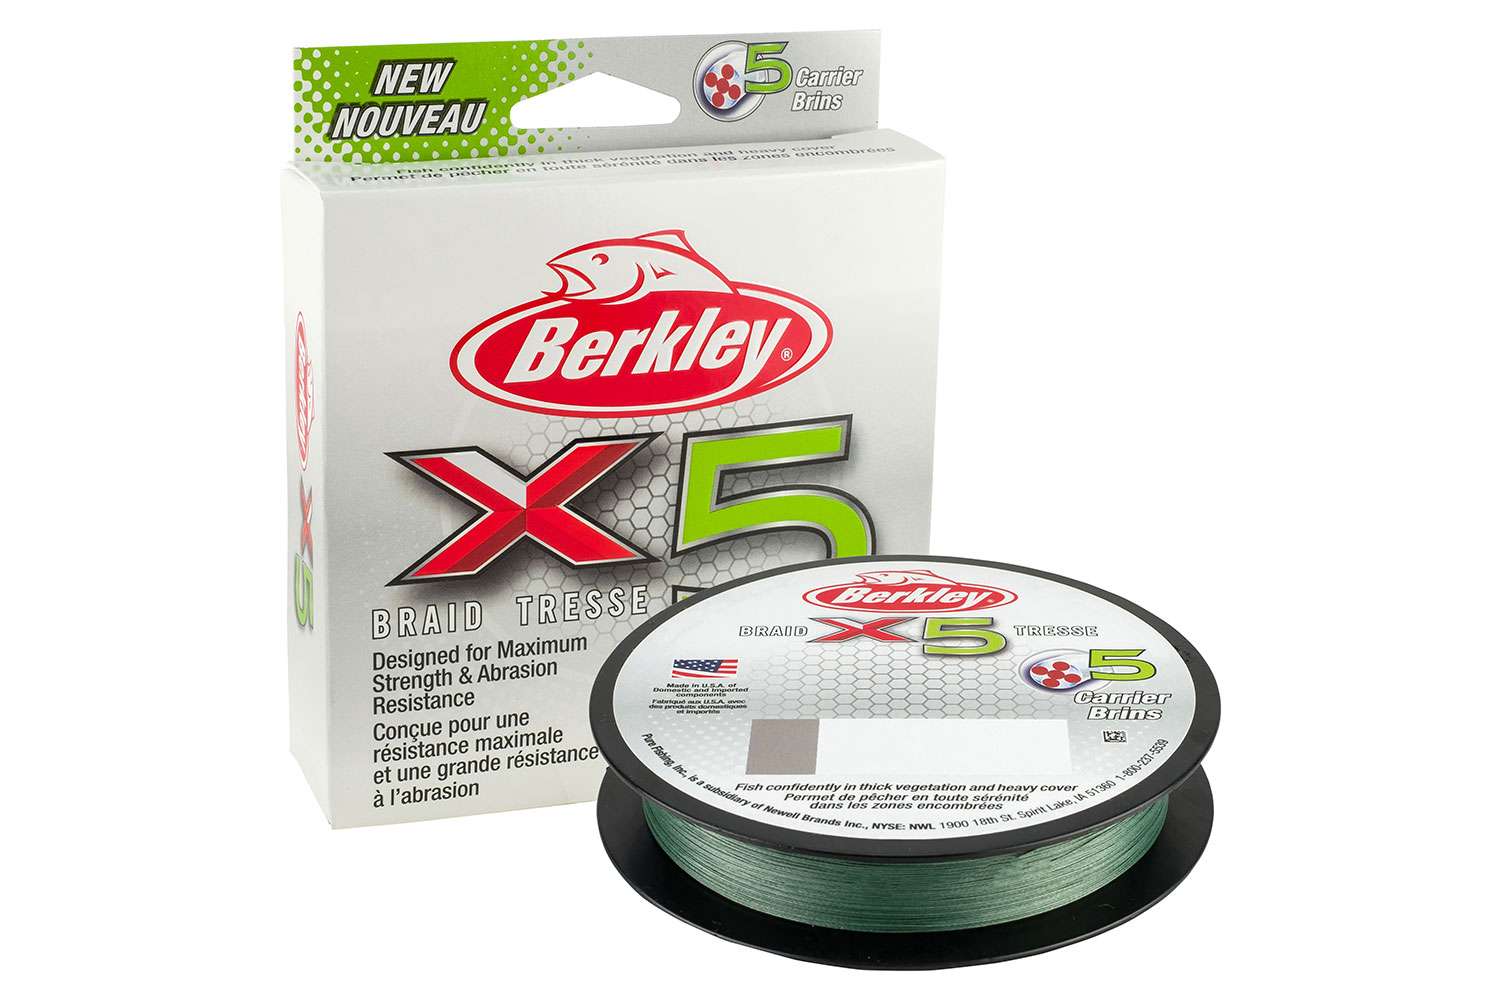 <p><b>Berkley x5 Braid, $13.99-$199.99</b></p> The new Berkley x5 braided line take strength and reliability to the next level by adding another strand, respectively, all while keeping the same diameter as traditional four- and eight-carrier braids. Designed for maximum strength and abrasion resistance, the new Berkley x5 braided line allows anglers to fish confidently in thick vegetation and heavy cover. <br> <a href=